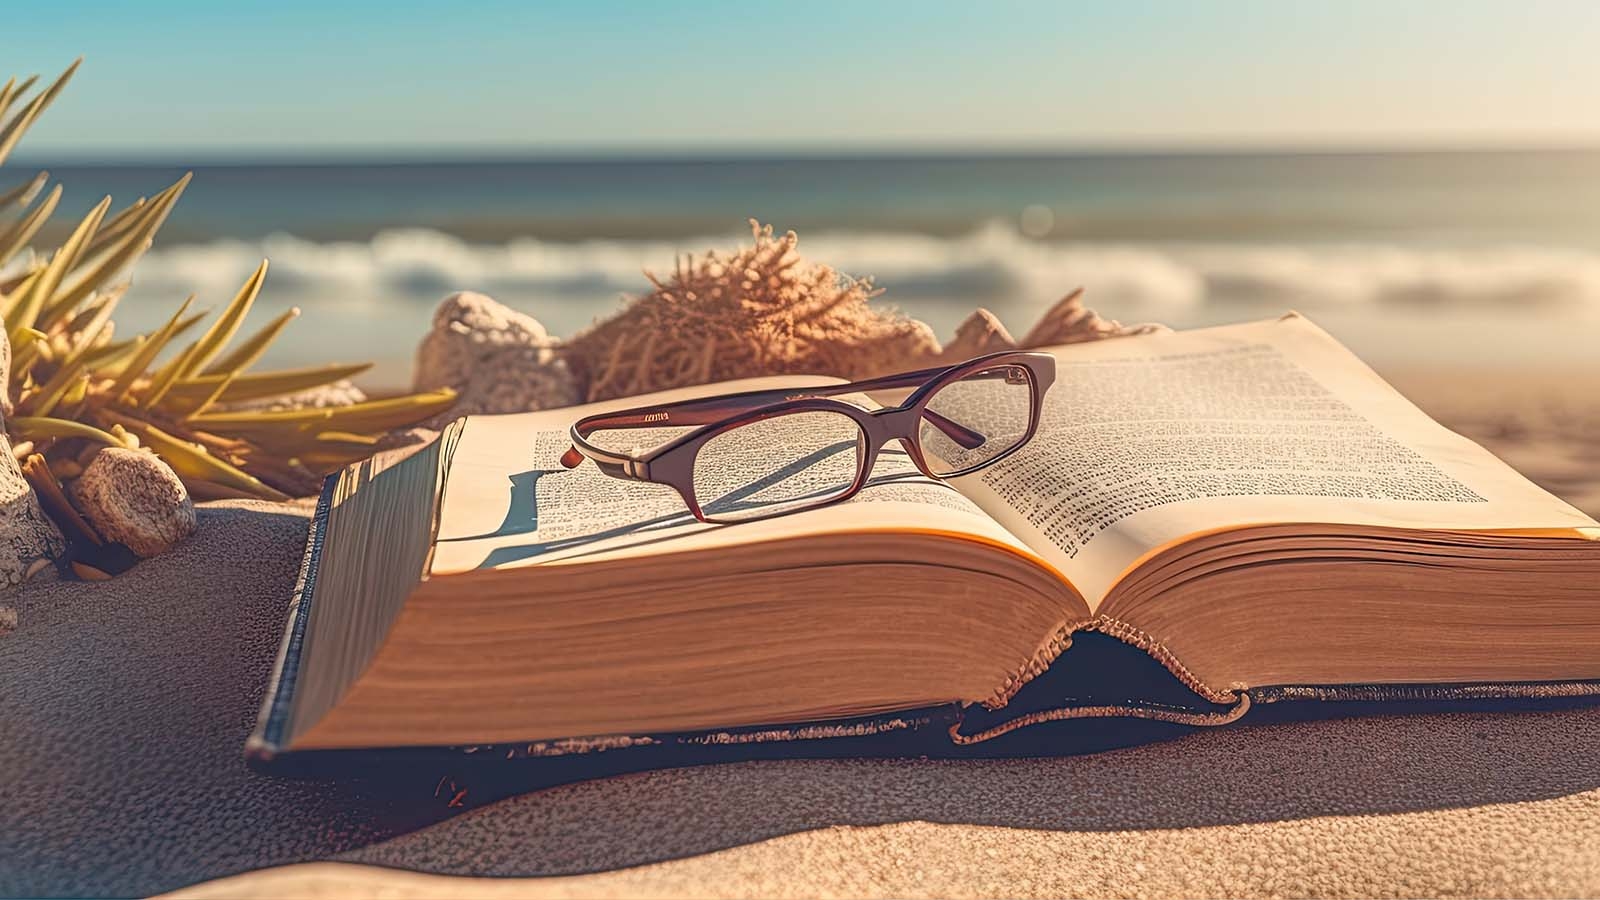 An open book on a beach, glasses perched on top the book. The ocean is blurry in the background. Shells and seaweed are visible to the left of the book.